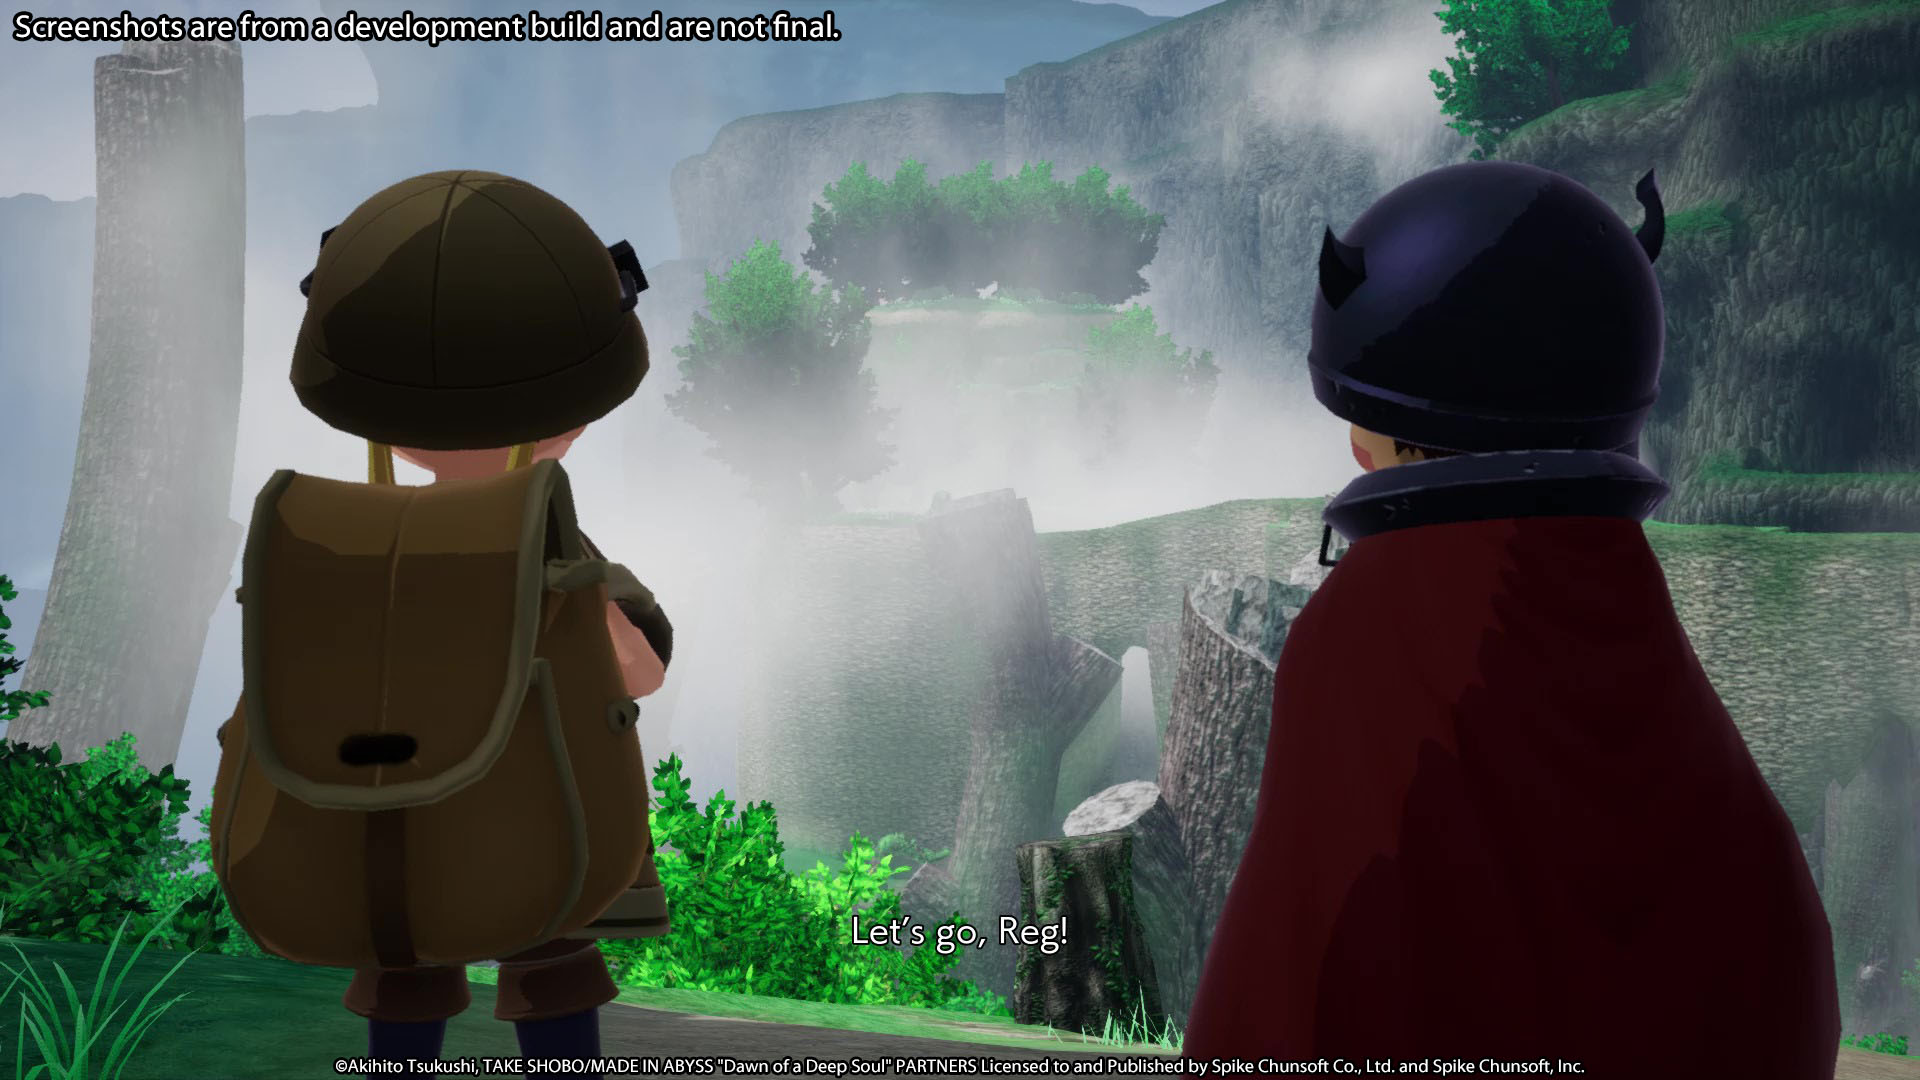 Made in Abyss: Binary Star Falling into Darkness launches September 2 -  Gematsu